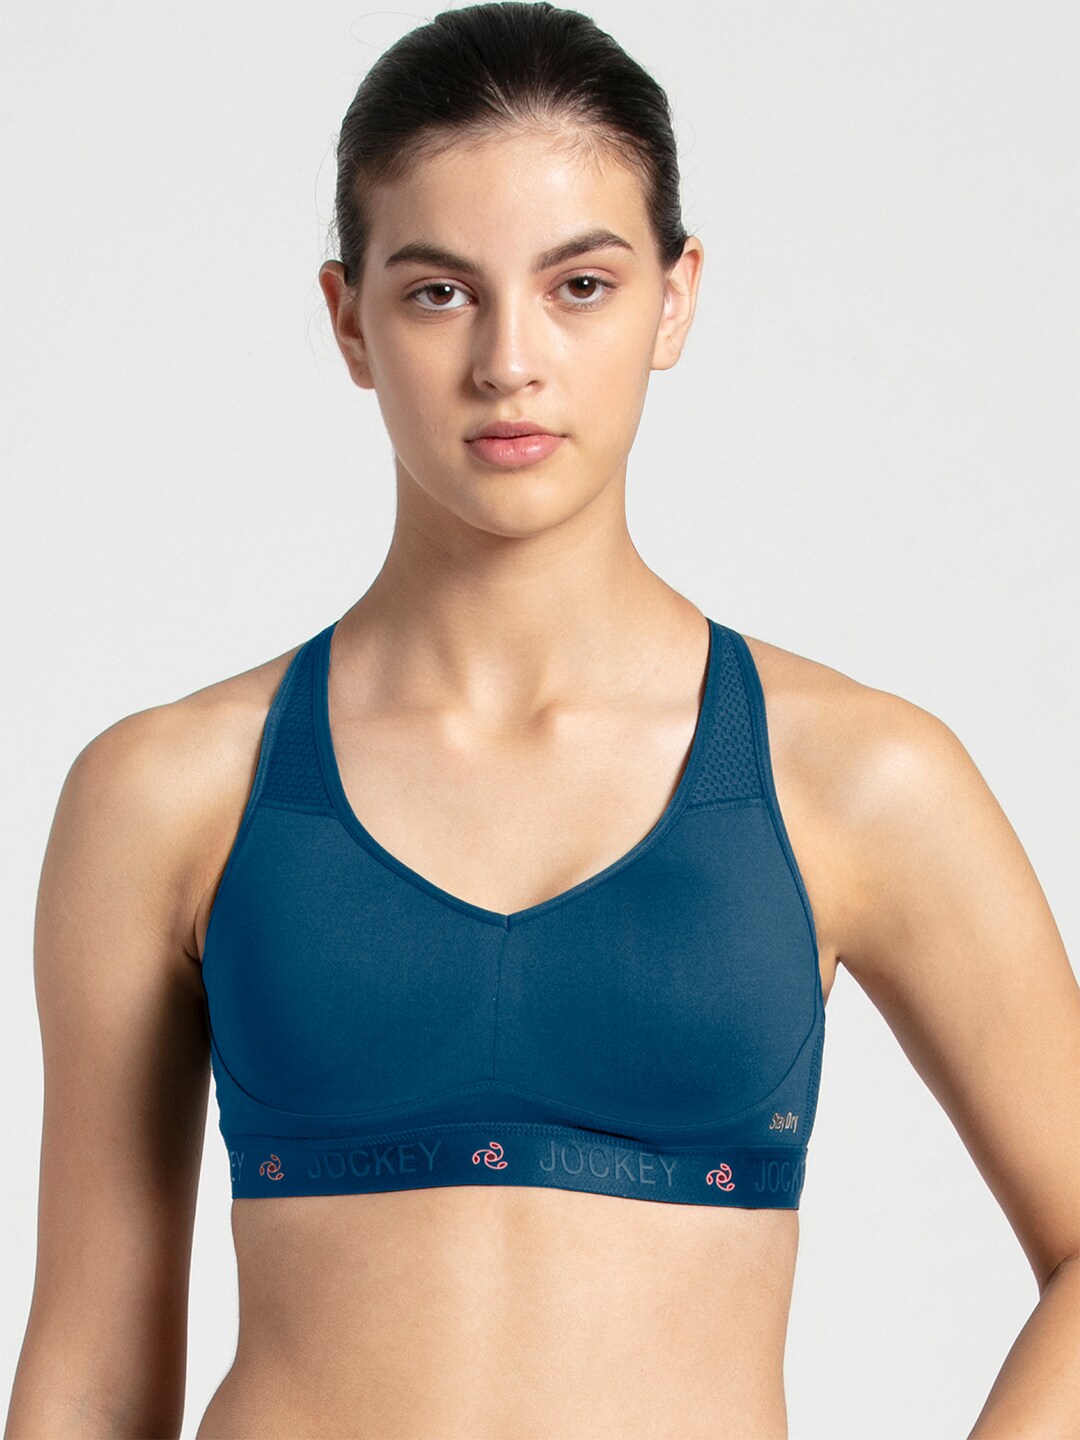 Jockey Teal Blue Non-Wired Lightly Padded Sports Bra AP21-0103 Price in India